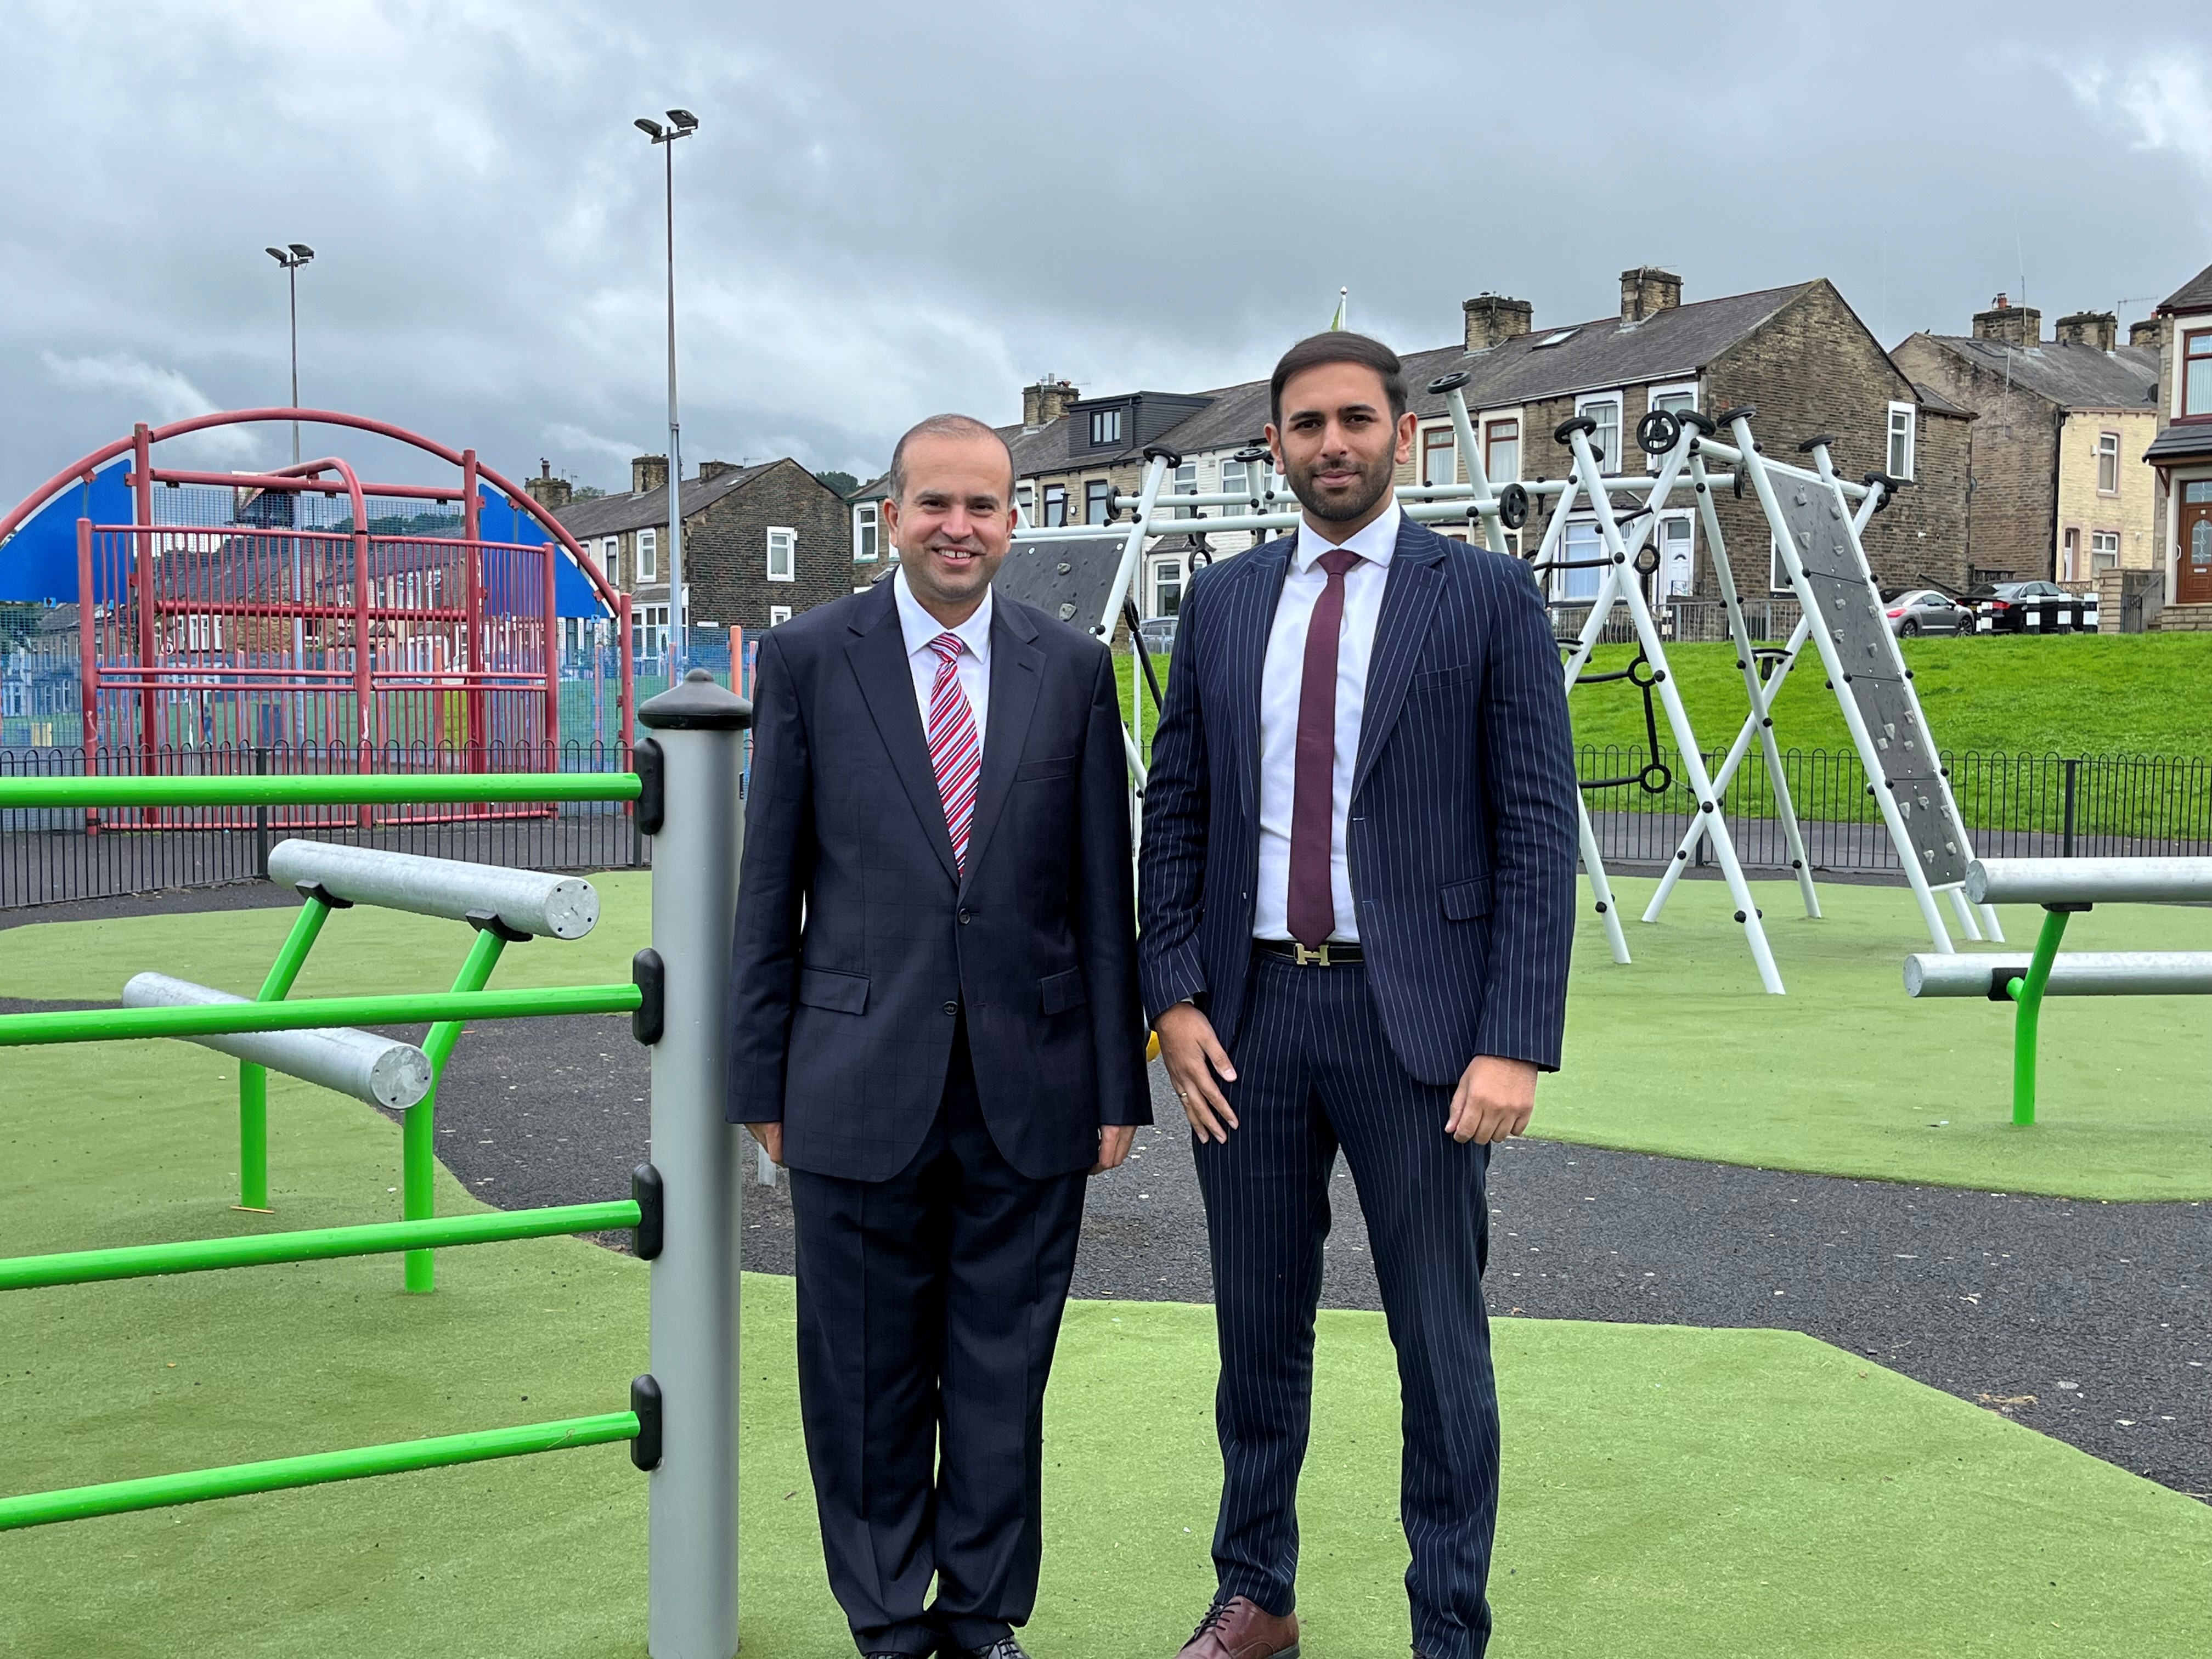 A new playground for teenagers has been completed at Walverden Park.